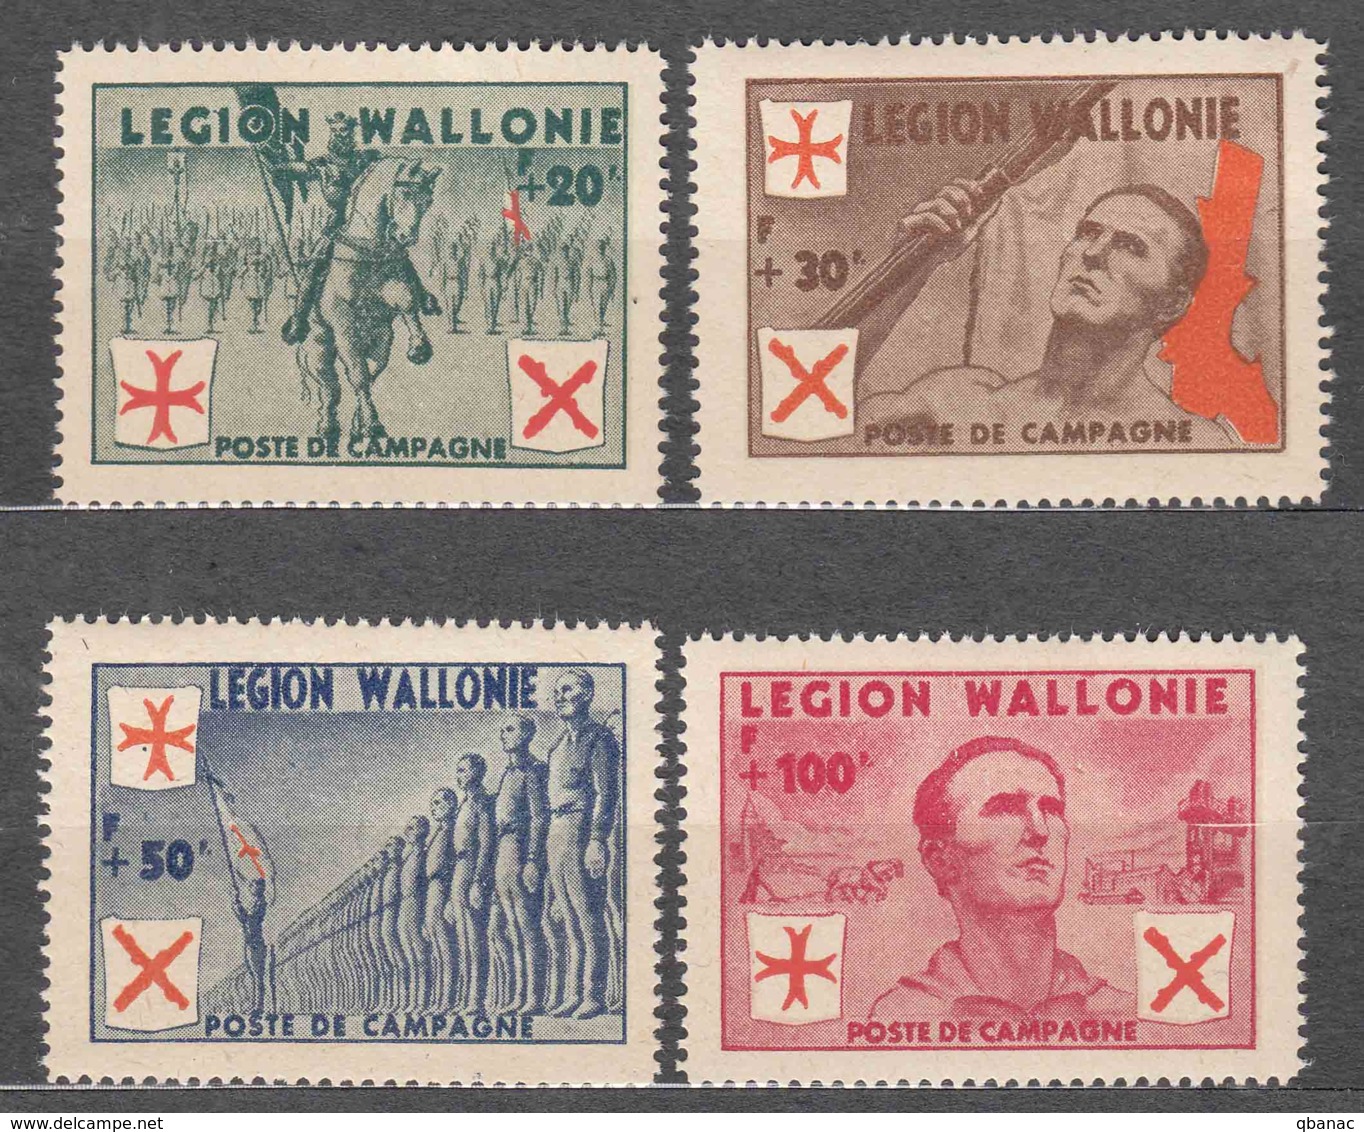 Germany Occupation In WWII Private Issues, 1941 Belguim Legion Wallonie Mi#IX-XIV Mint Never Hinged - Occupation 1938-45